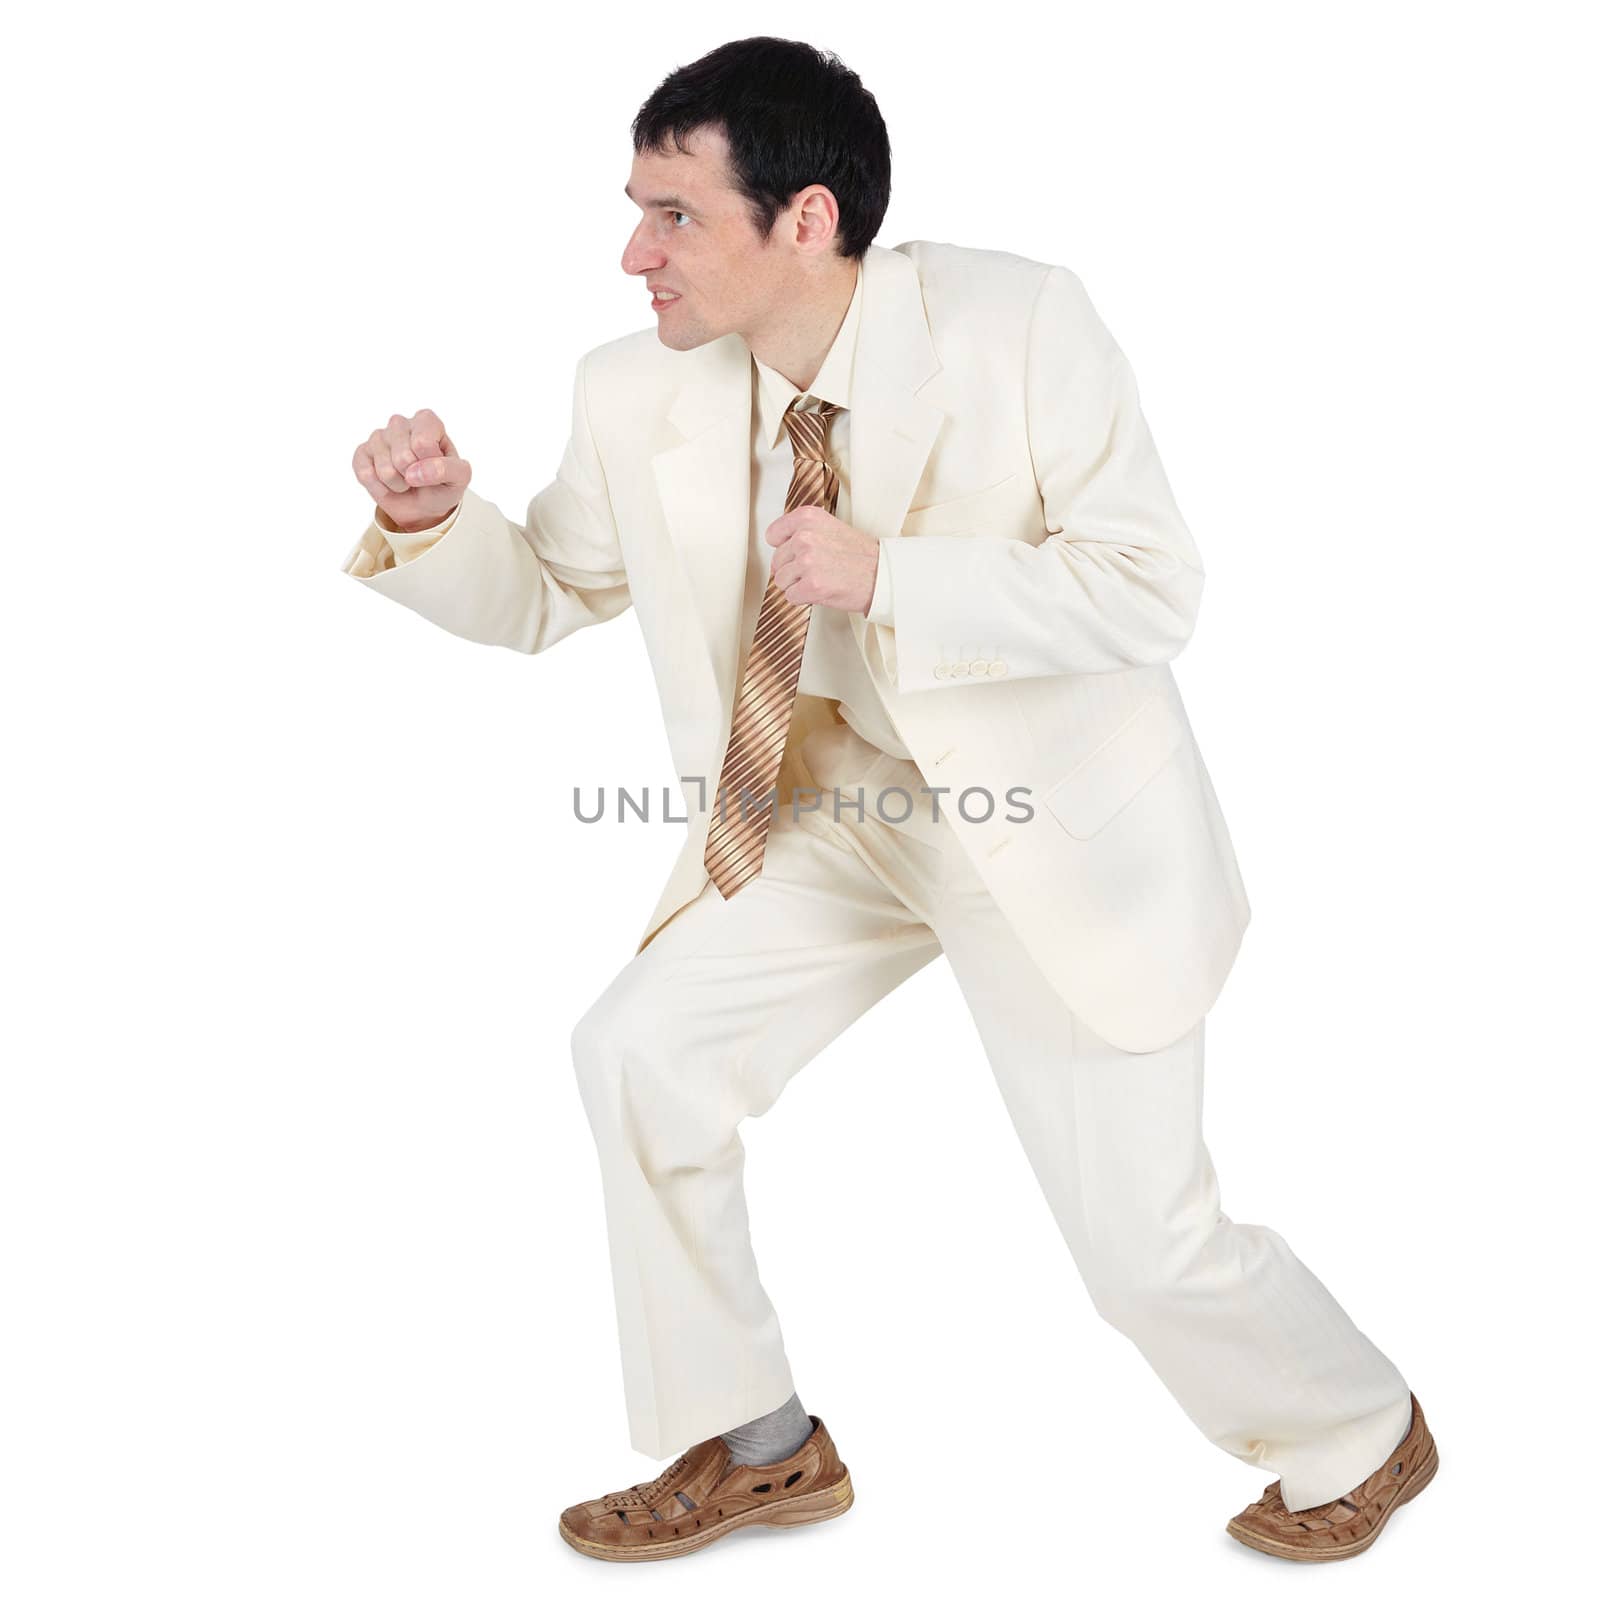 An aggressive businessman, willing to attack, isolated on a white background